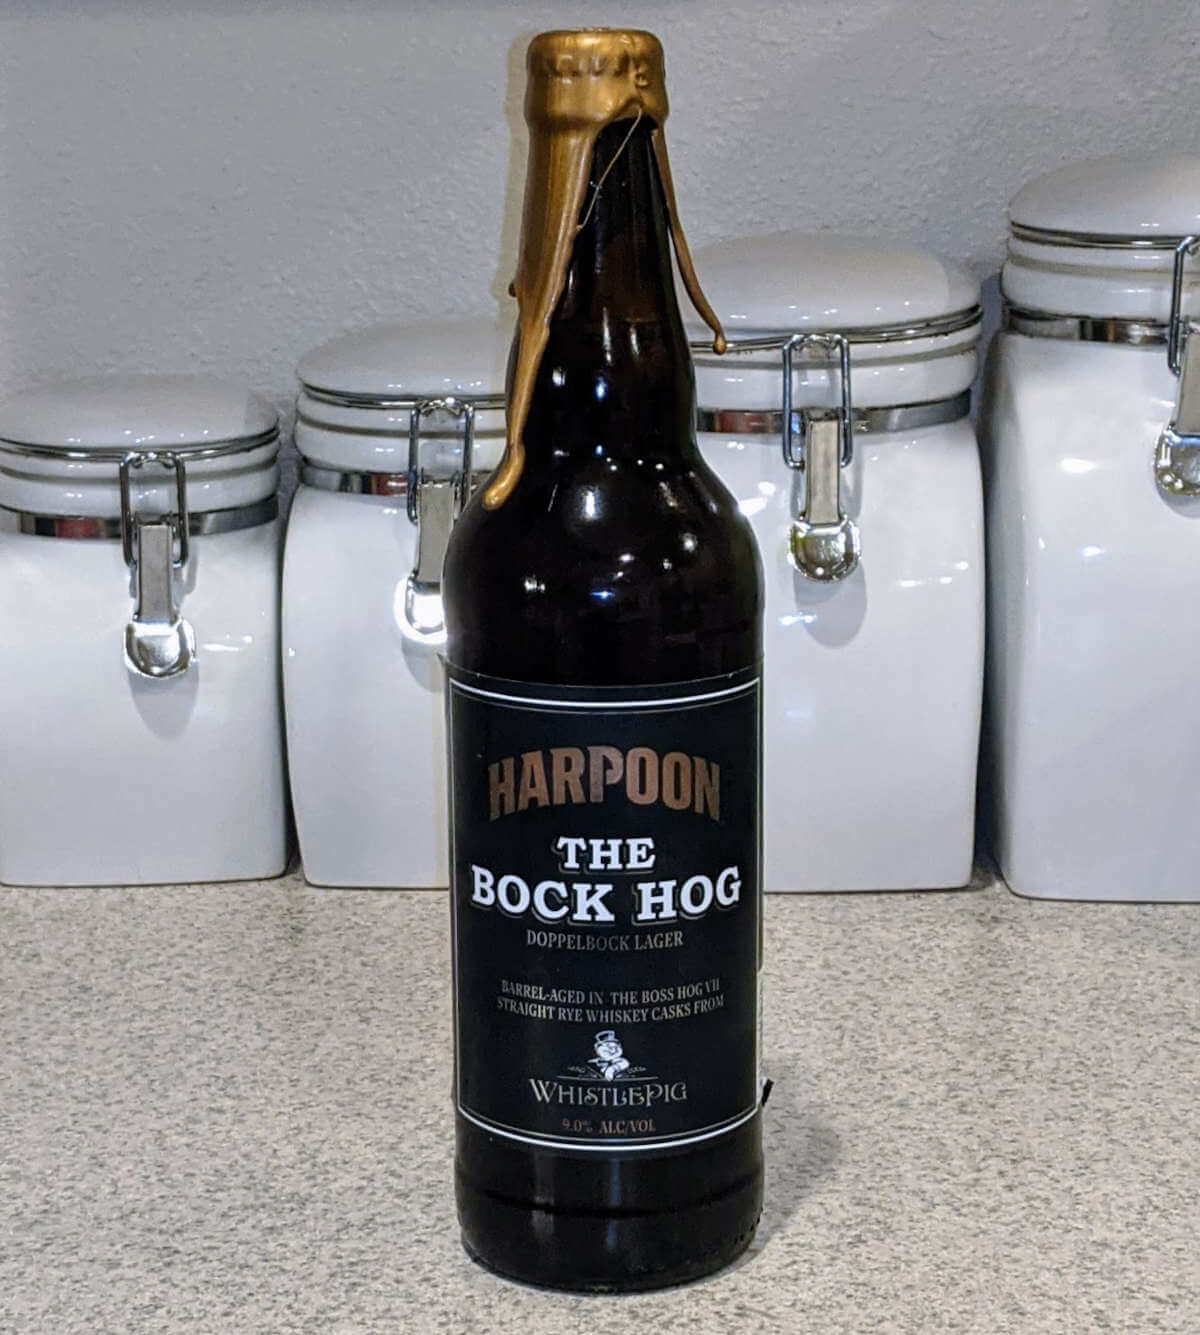 Harpoon Brewery & WhistlePig Rye Whiskey collaborate on The Bock Hog Doppelbock (received)